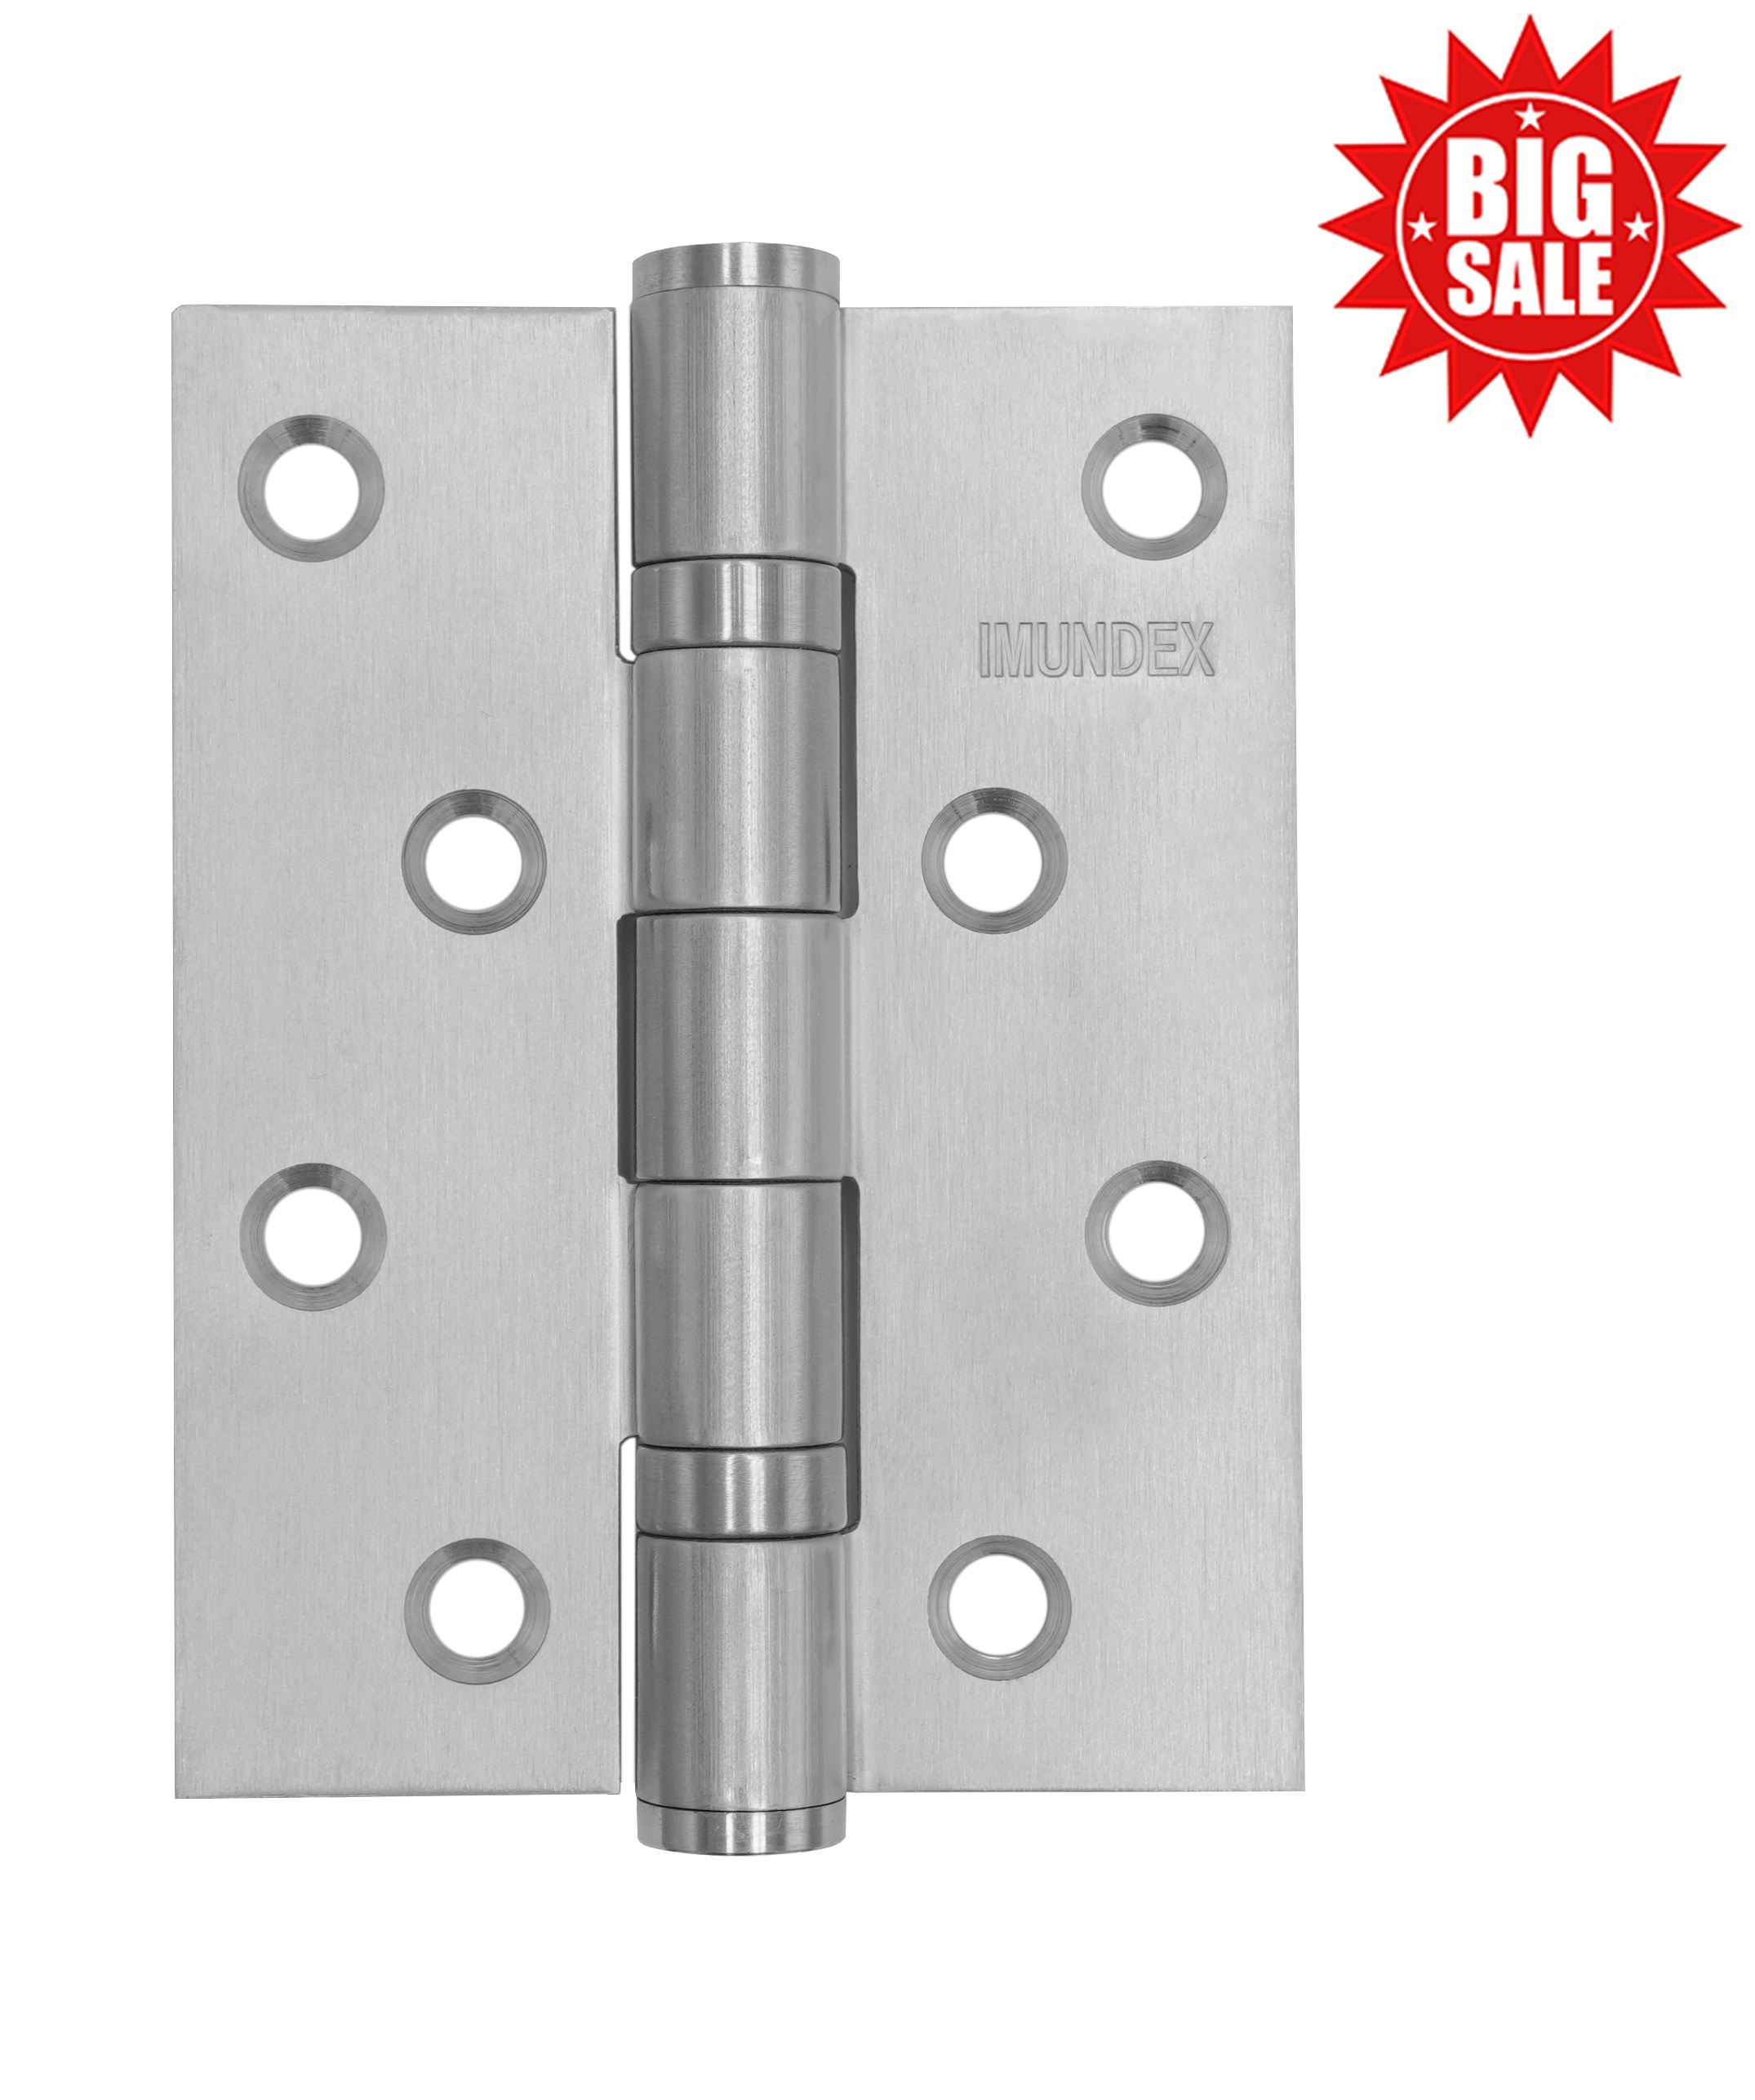 Ball bearing hinge with small size - 2BB - SS304